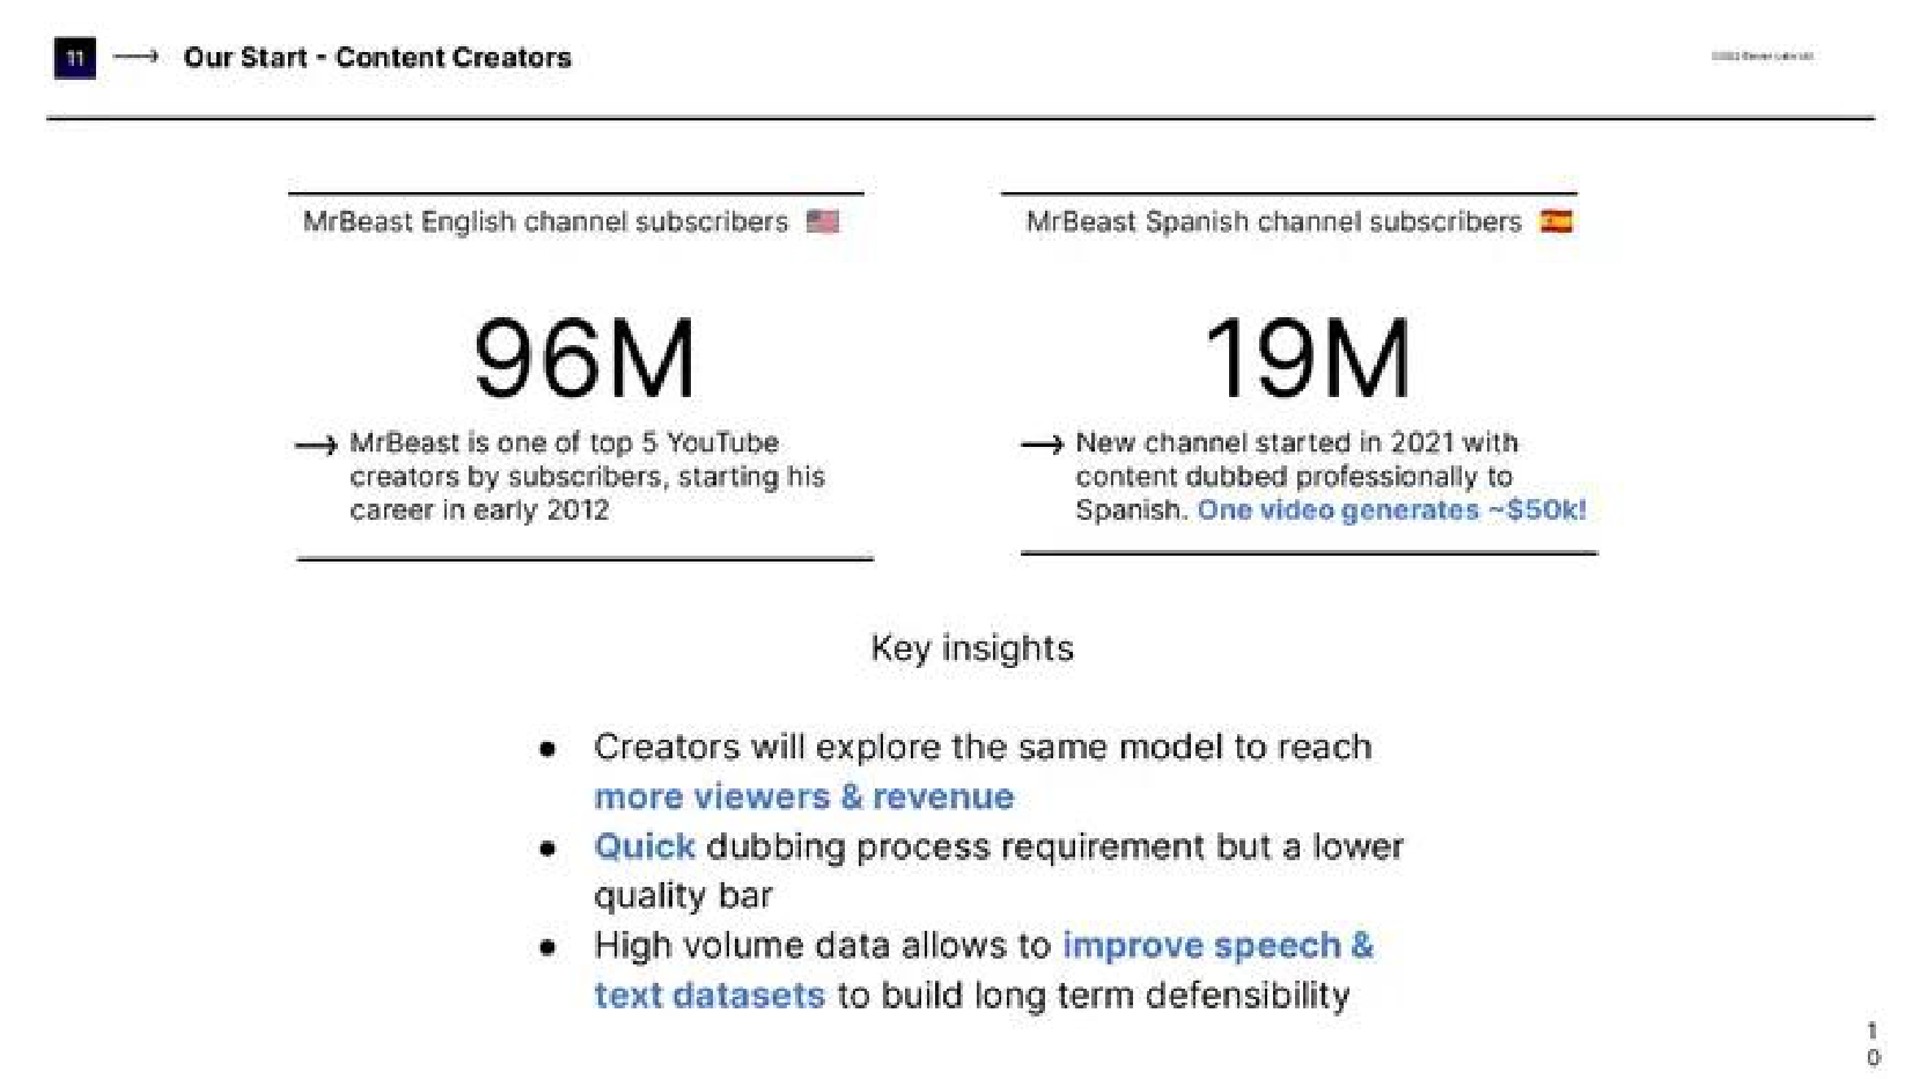 key insights creators will explore the same model to reach more viewers revenue quick dubbing process requirement but a lower quality bar high volume data allows to improve speech text to build long term defensibility | ElevenLabs